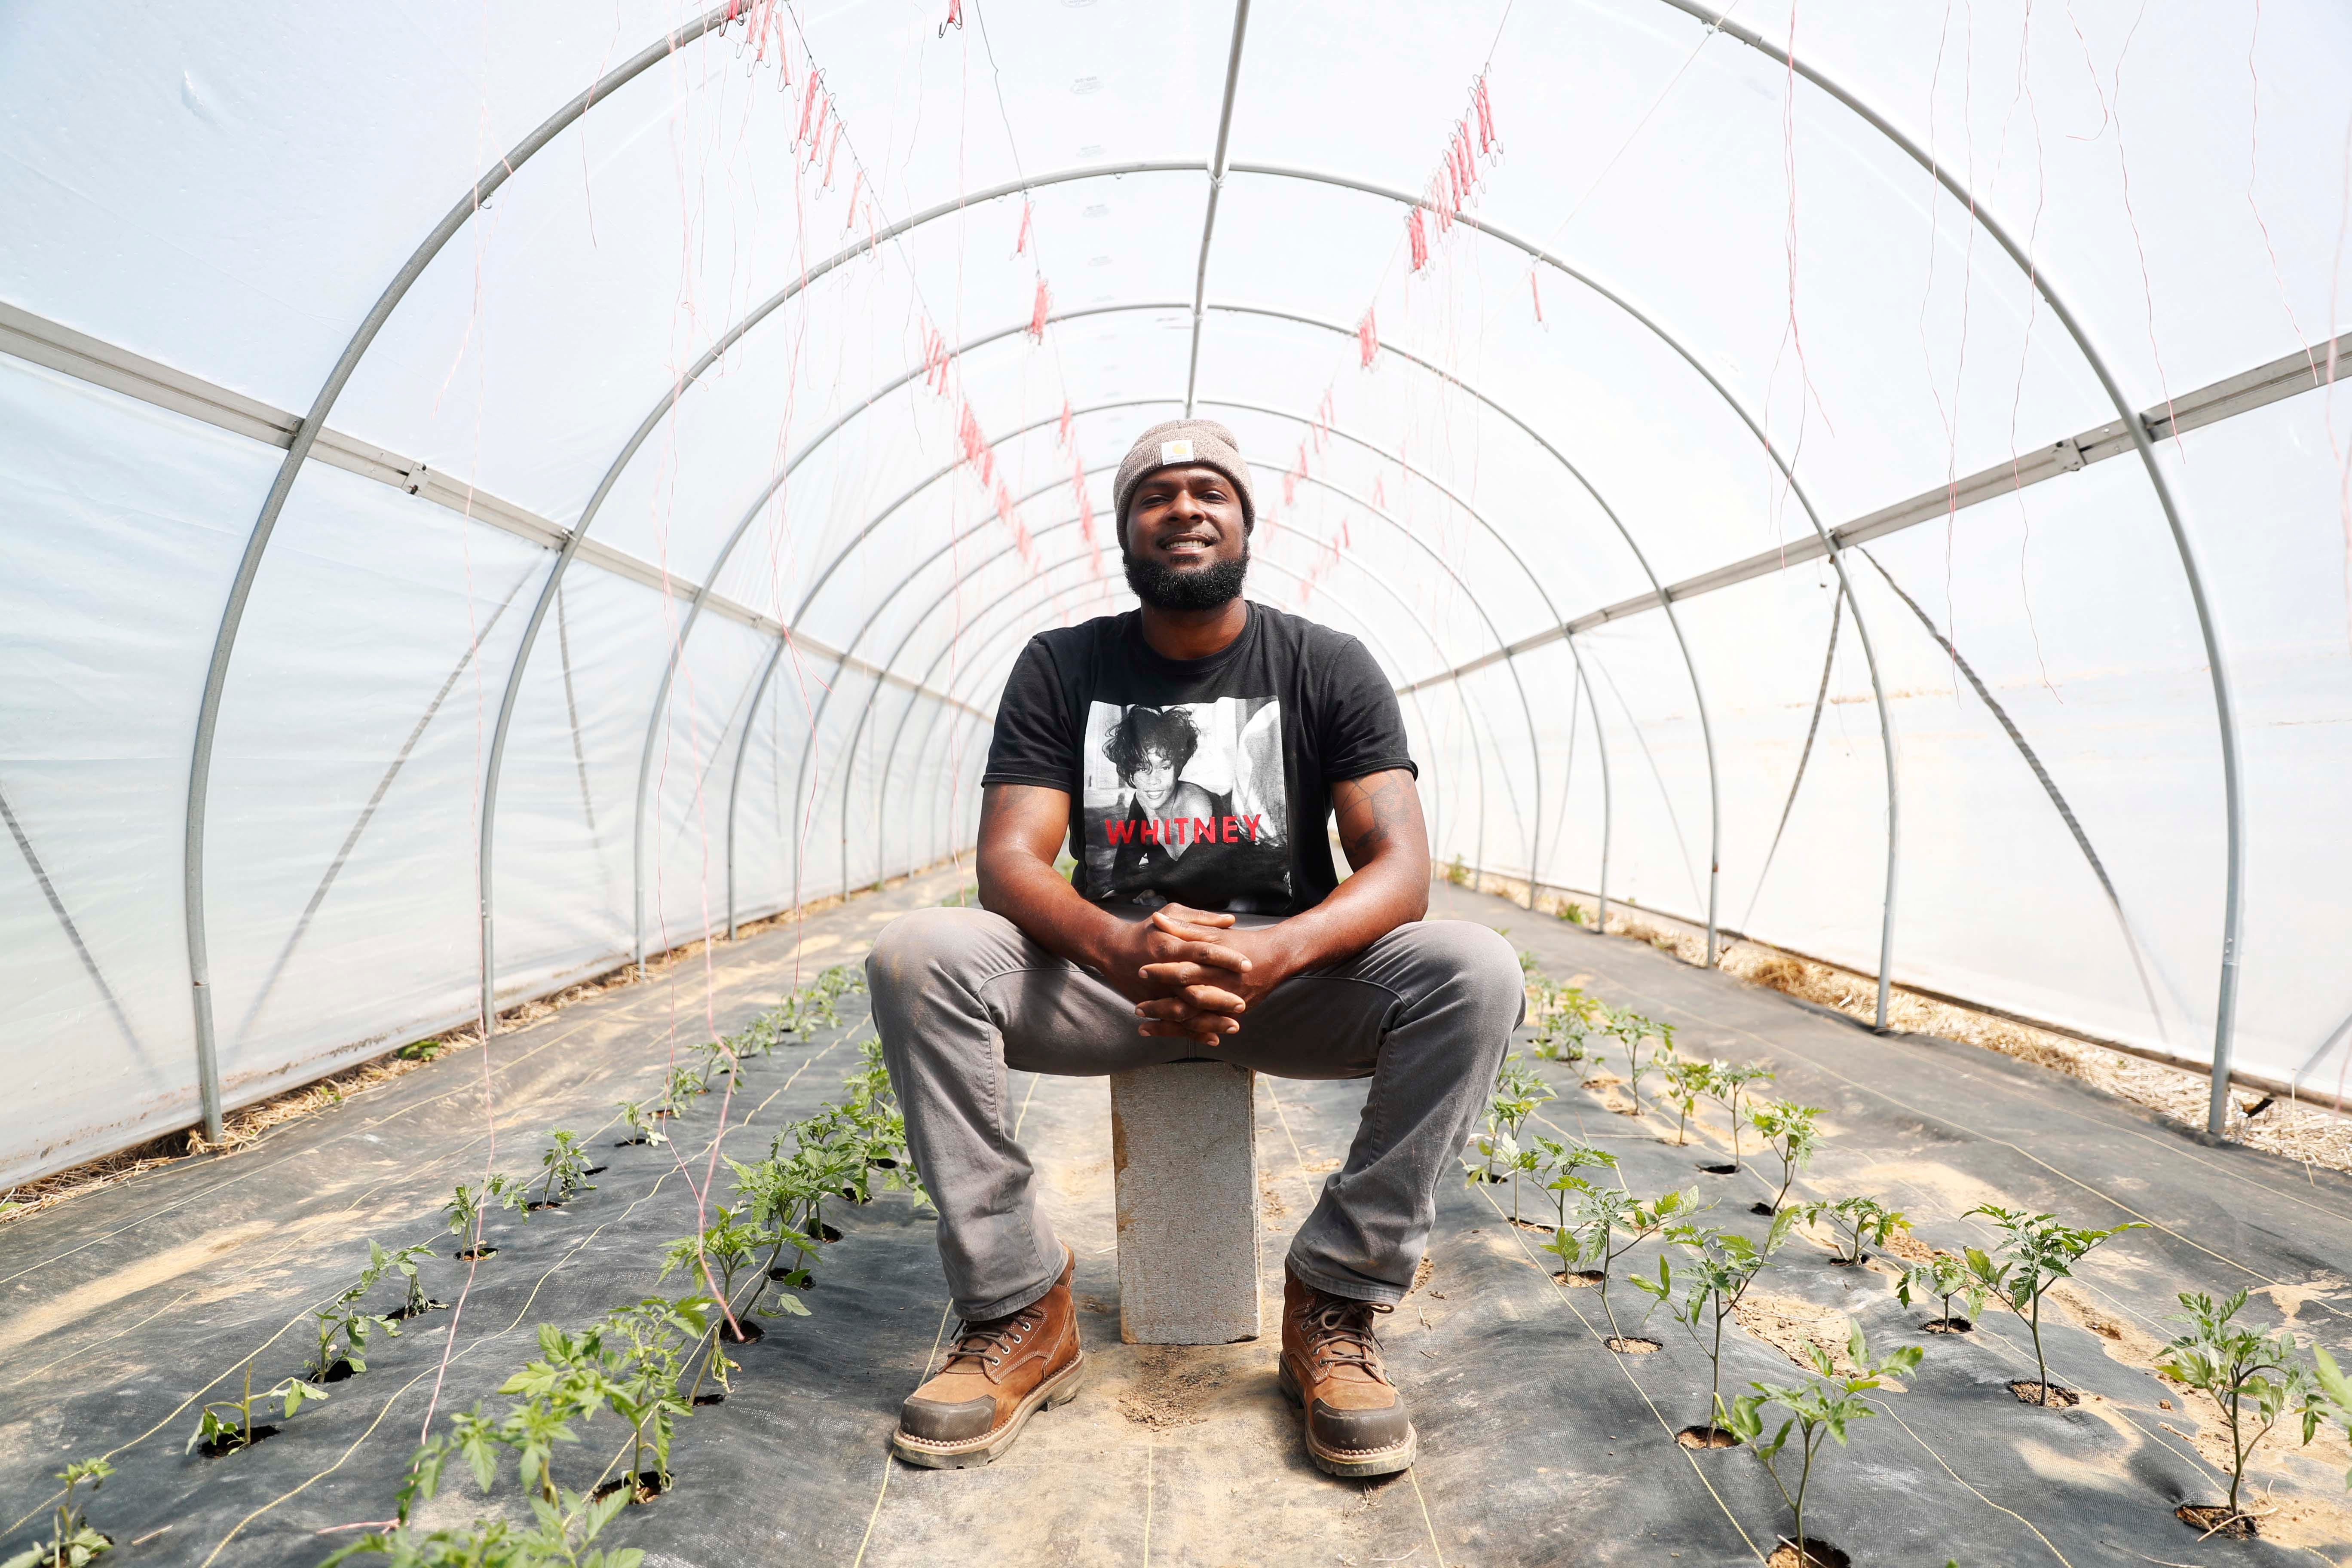 Matthew Robinson, a young farmer, poses in front of planted tomatoes in his hoop house type greenhouse at his farm in Stanton, Tennessee, on May 3, 2023.